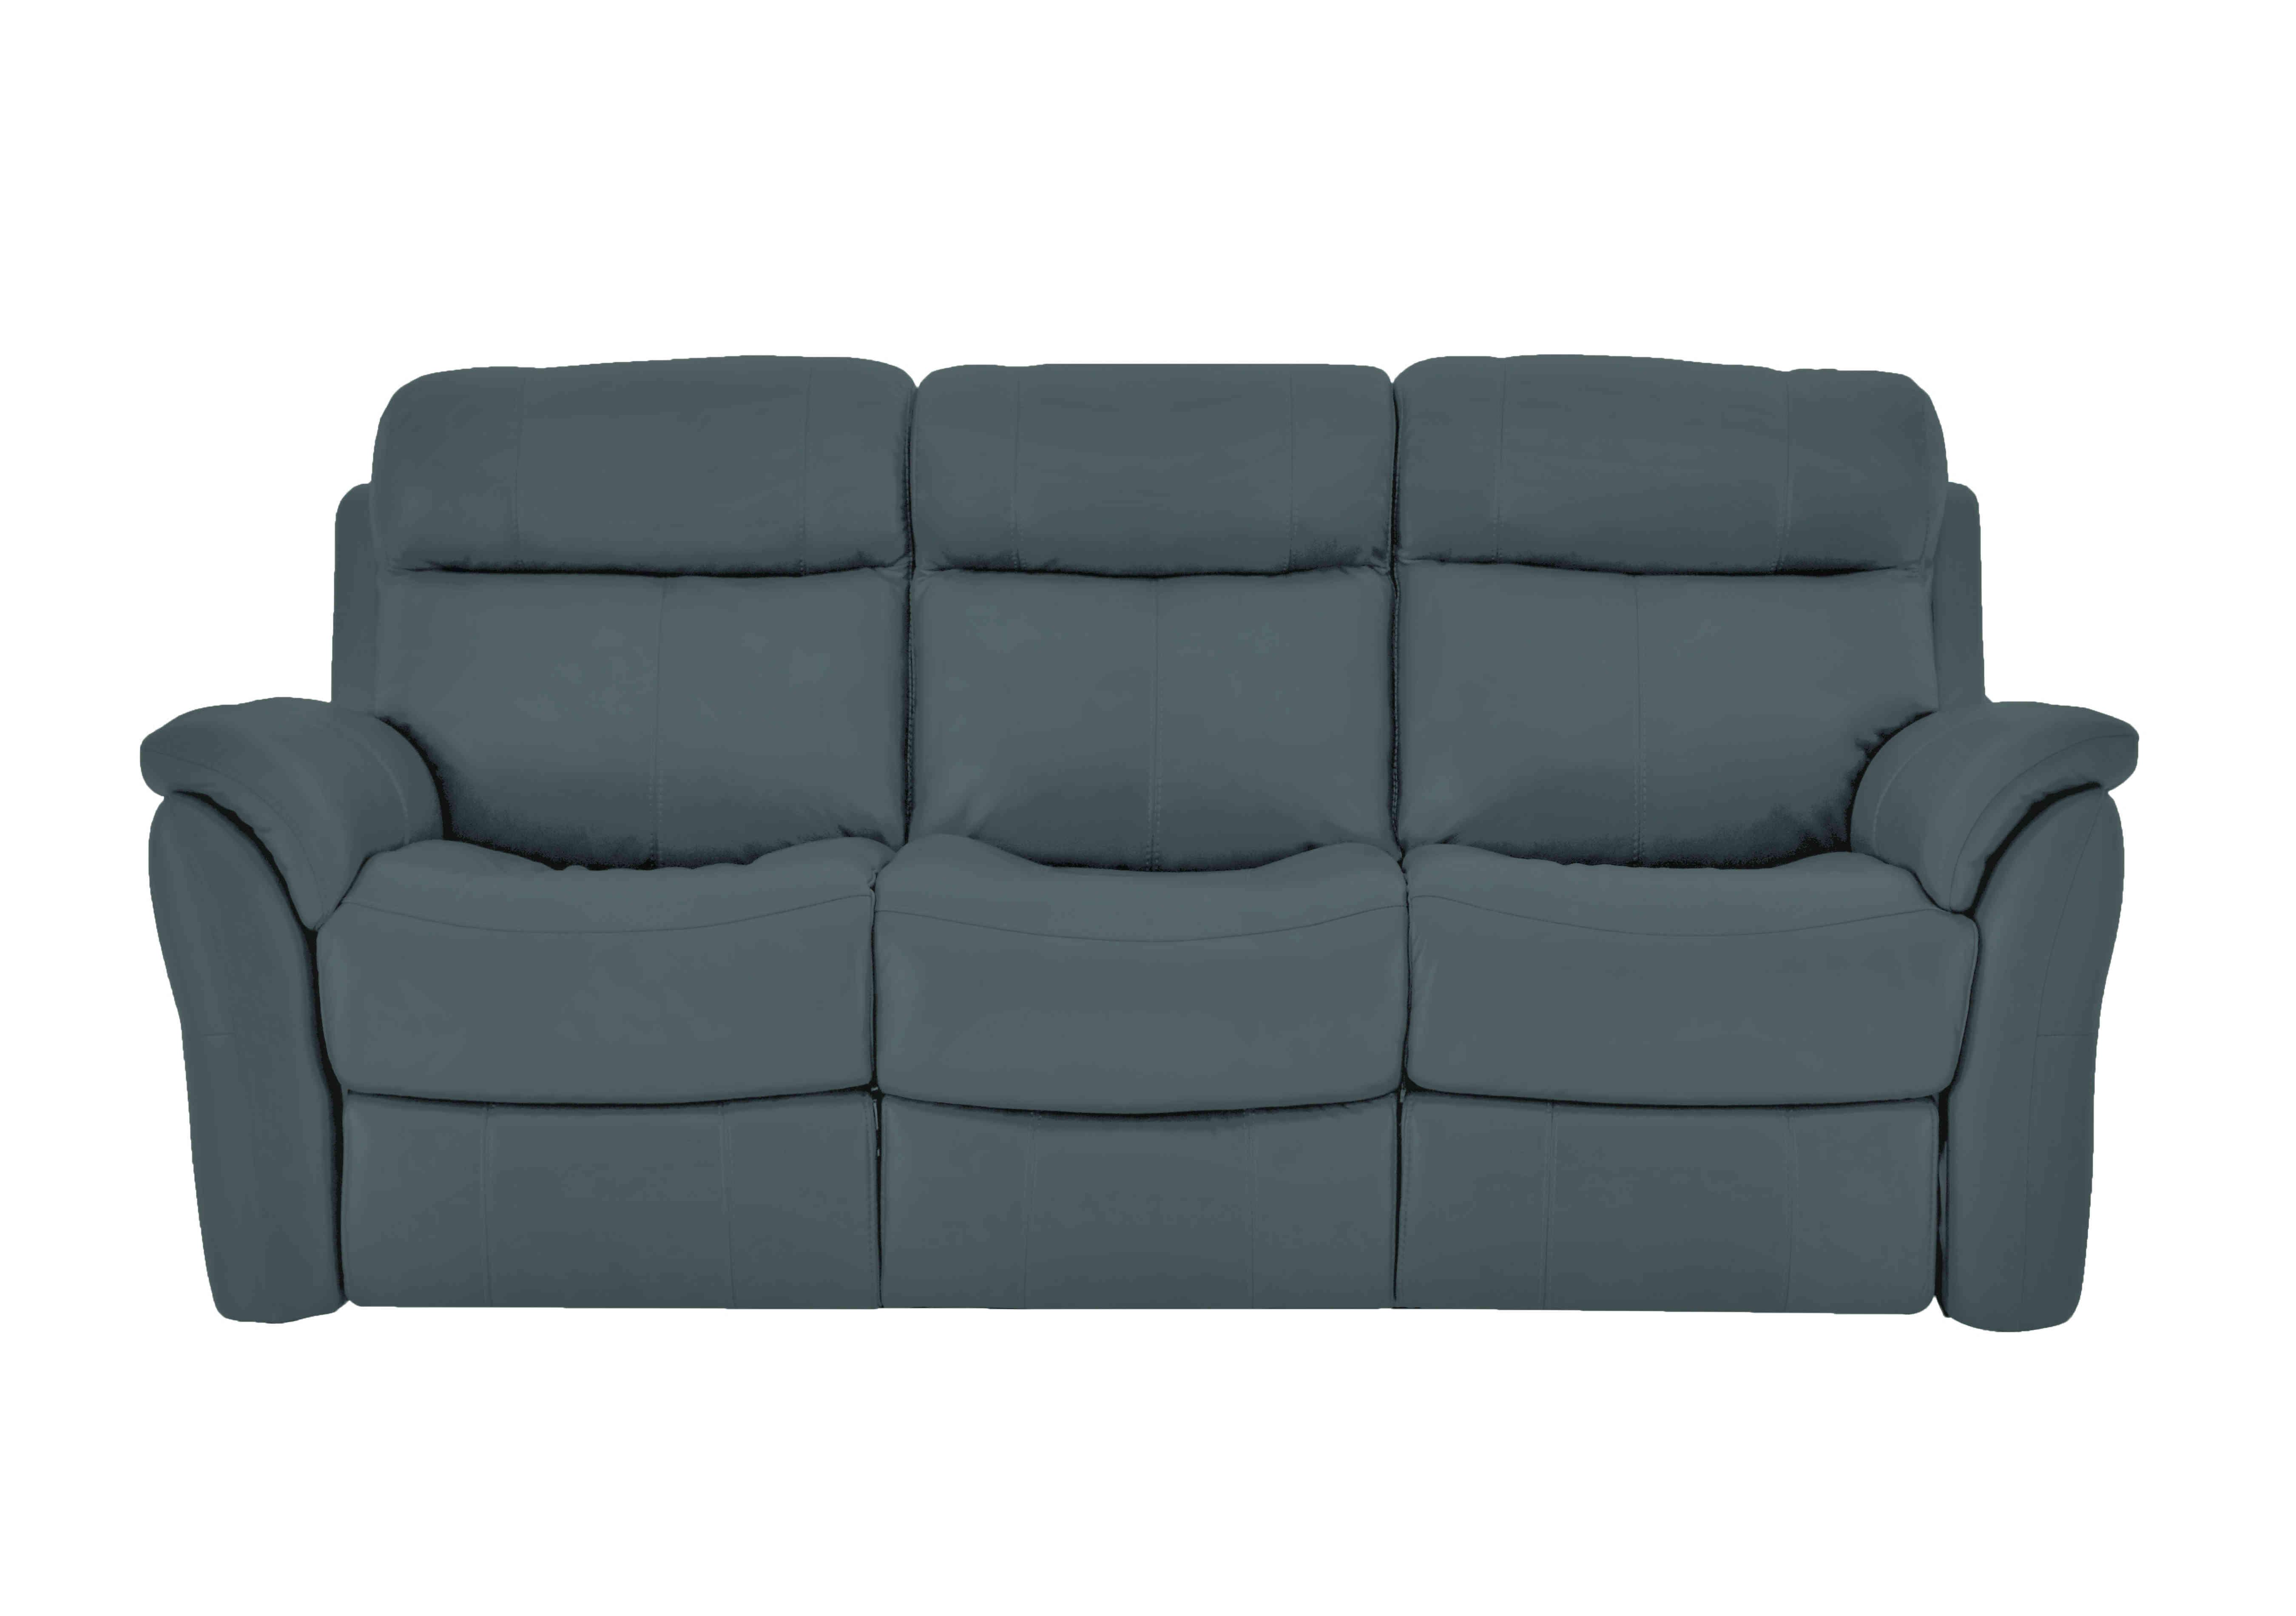 Relax Station Revive 3 Seater Leather Sofa in Bv-301e Lake Green on Furniture Village